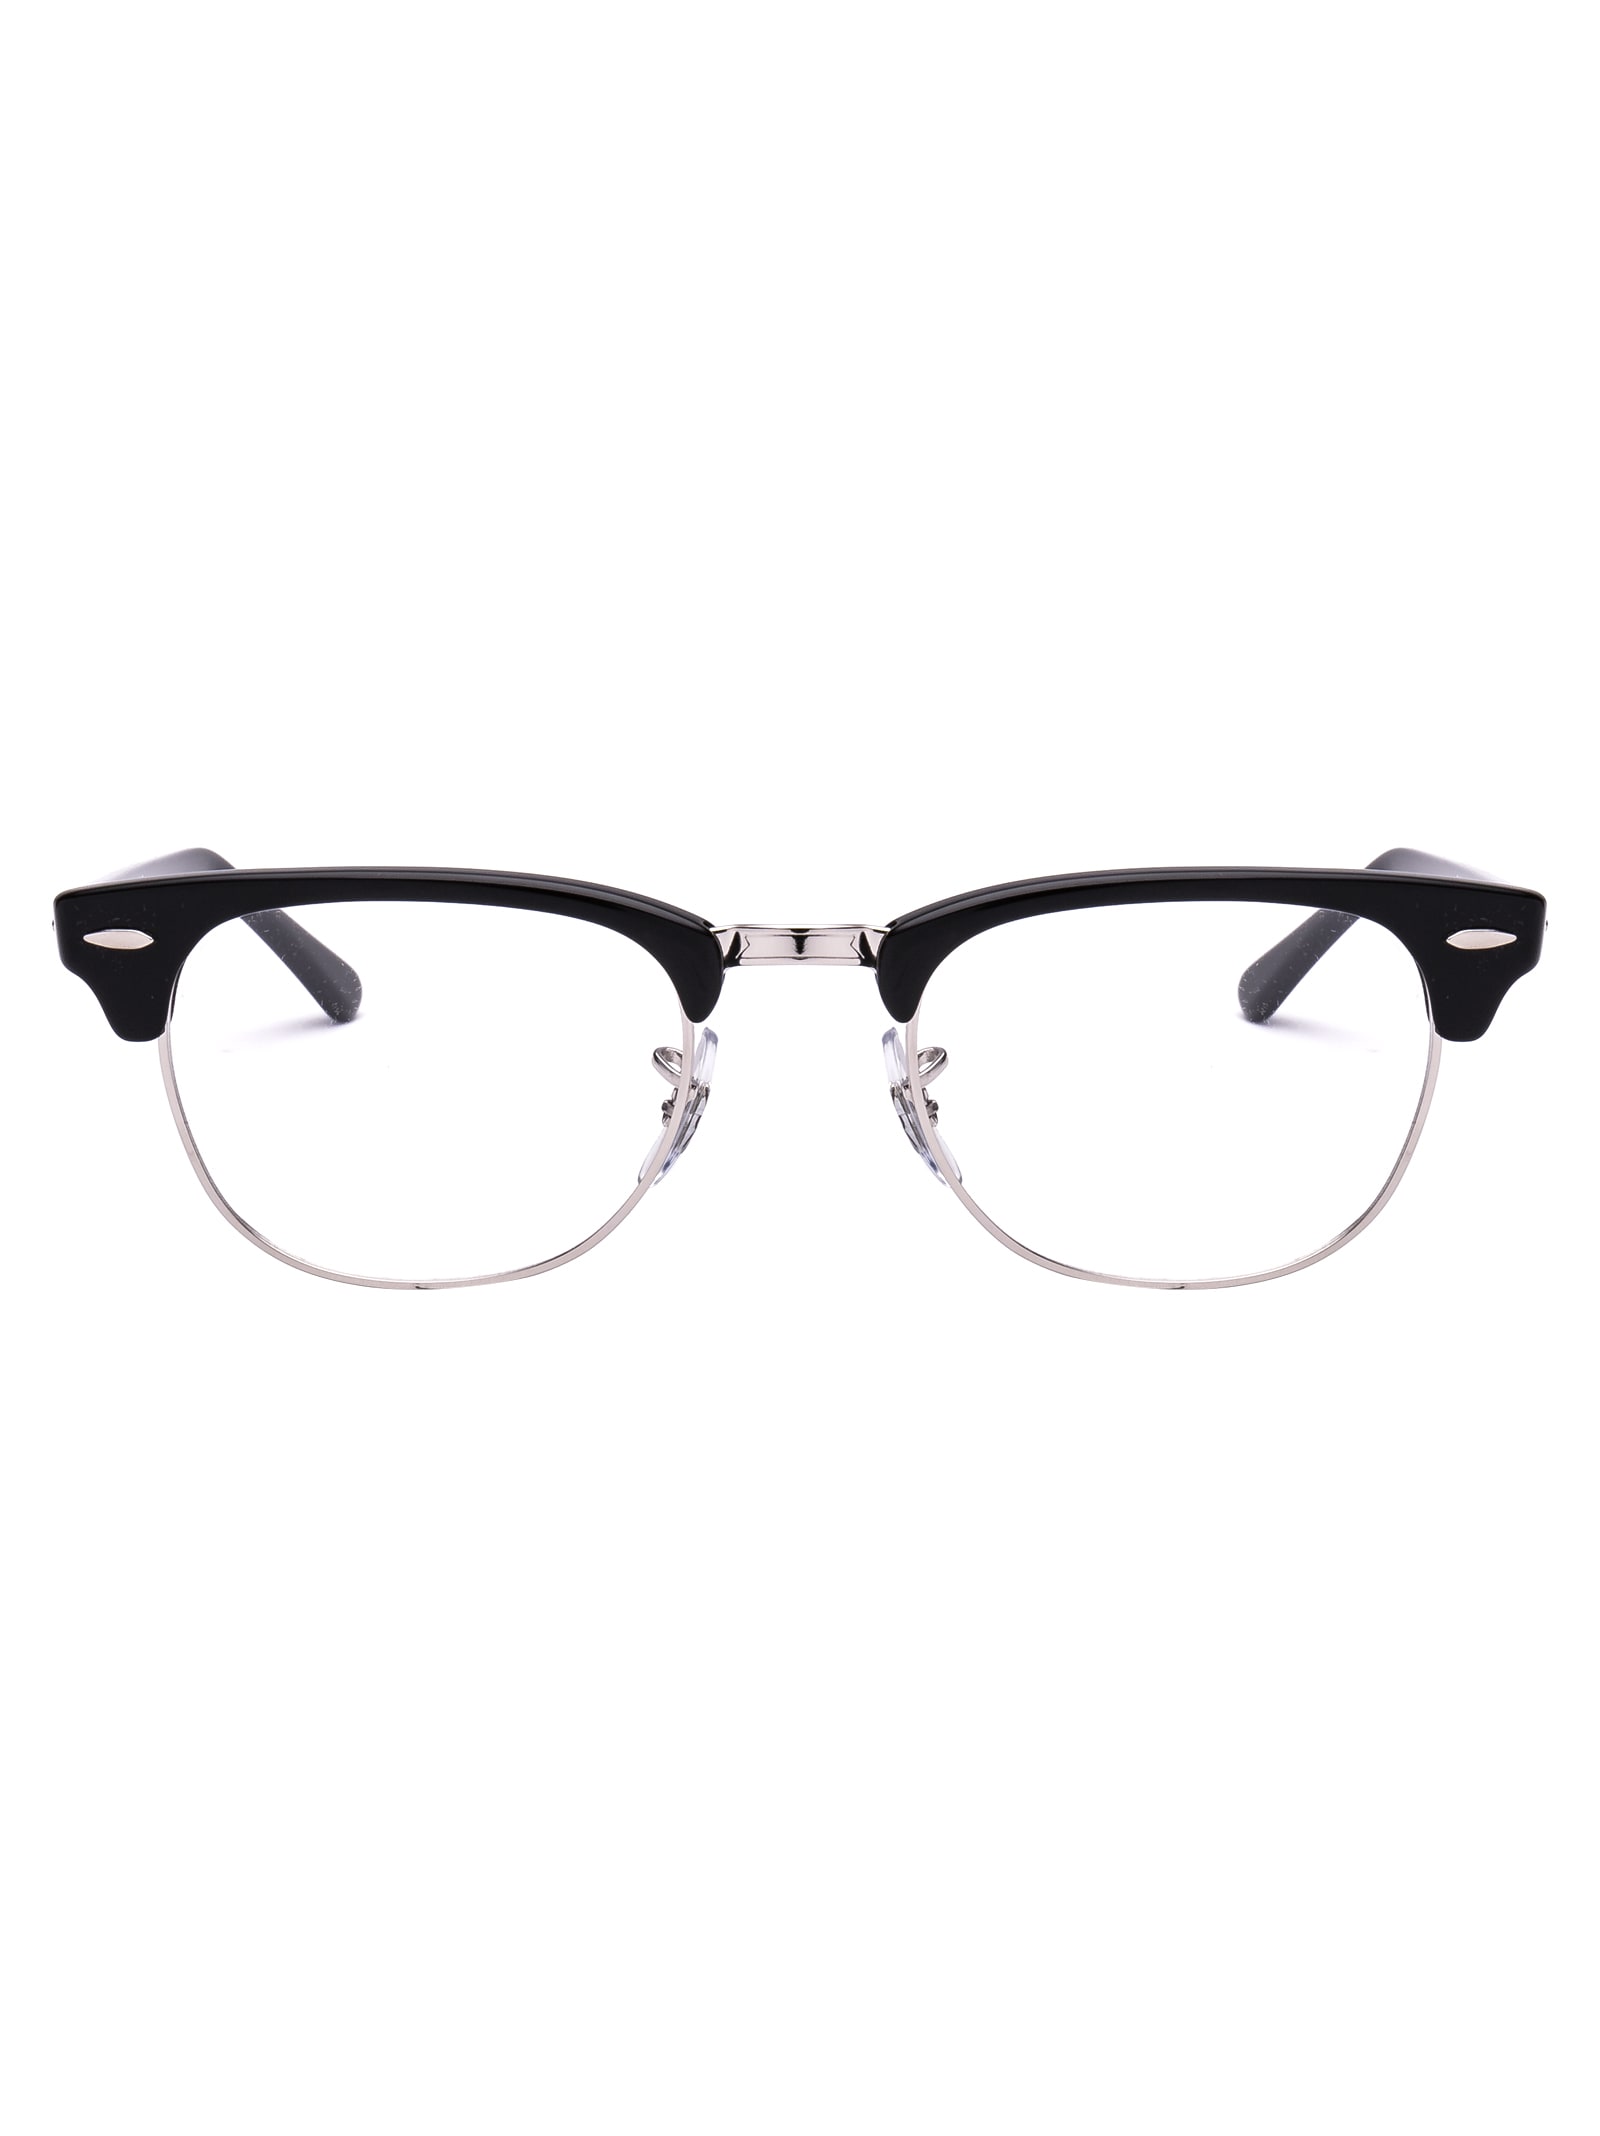 Ray Ban Clubmaster Glasses In 2000 Black